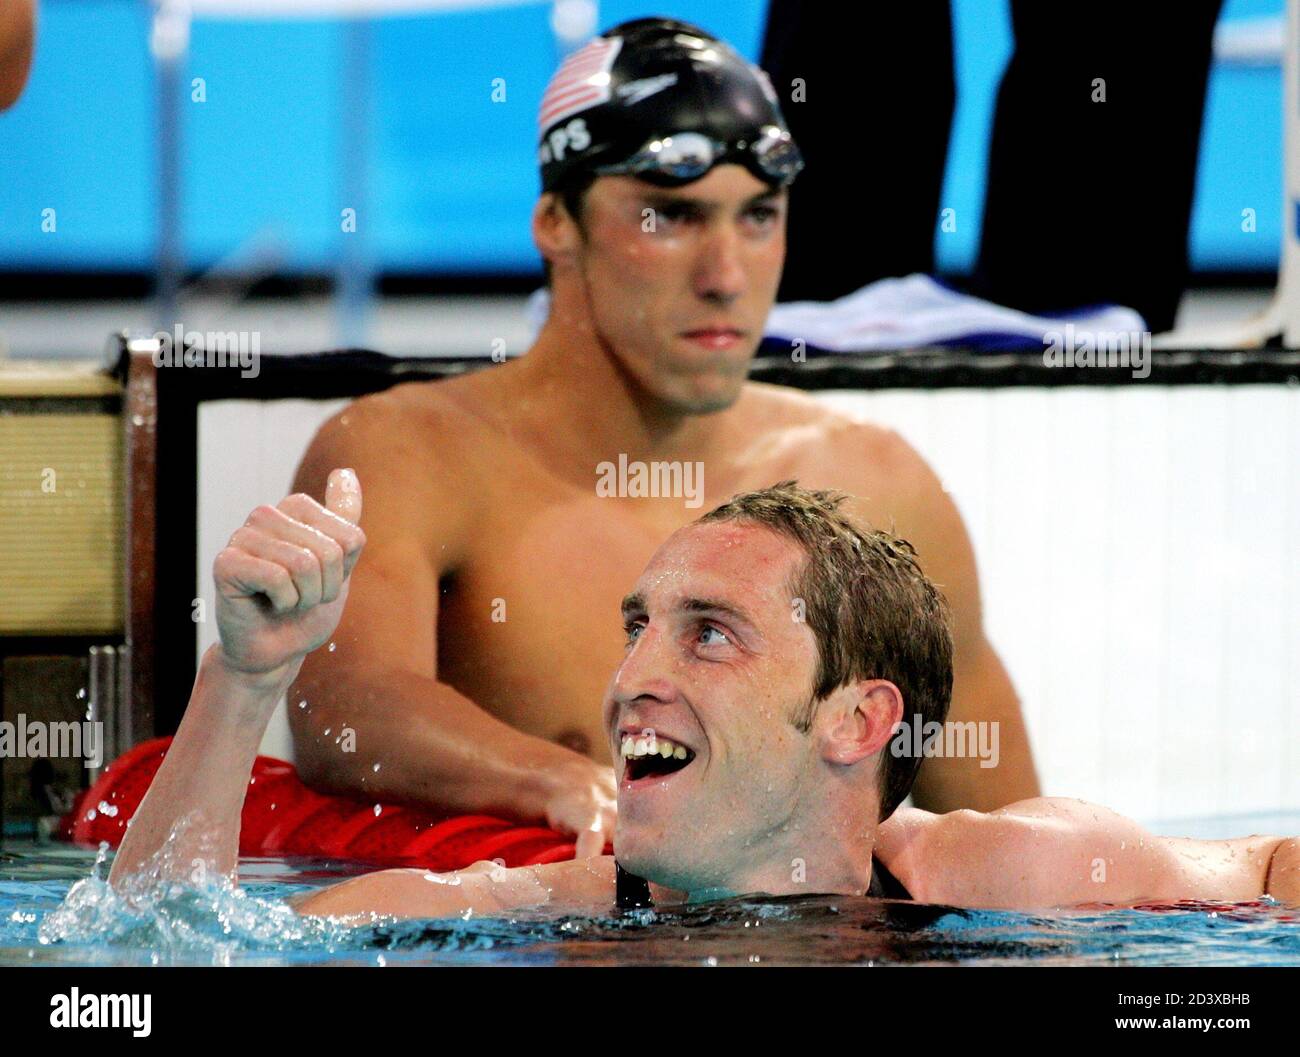 Stephen Parry Front From Britain Celebrates His 200 Metres Men S Butterfly Bronze Medal At The Olympic Aquatic Centre August 17 2004 At The Athens 2004 Olympic Games Michael Phelps Background